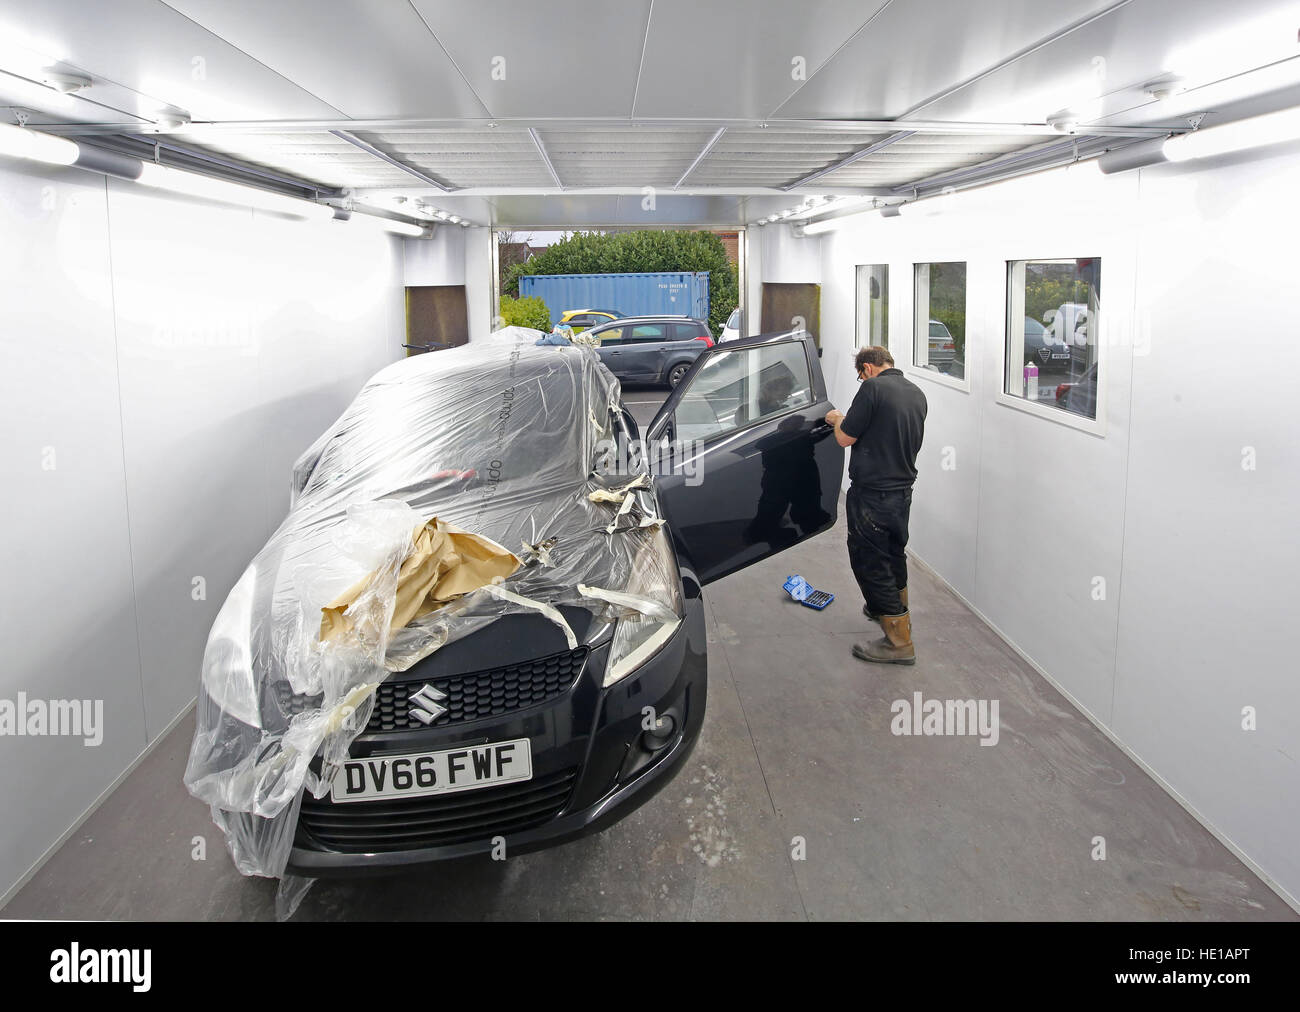 A mechanic in a car body repair shop removes masking after painting (numberplate numbers changed) Stock Photo